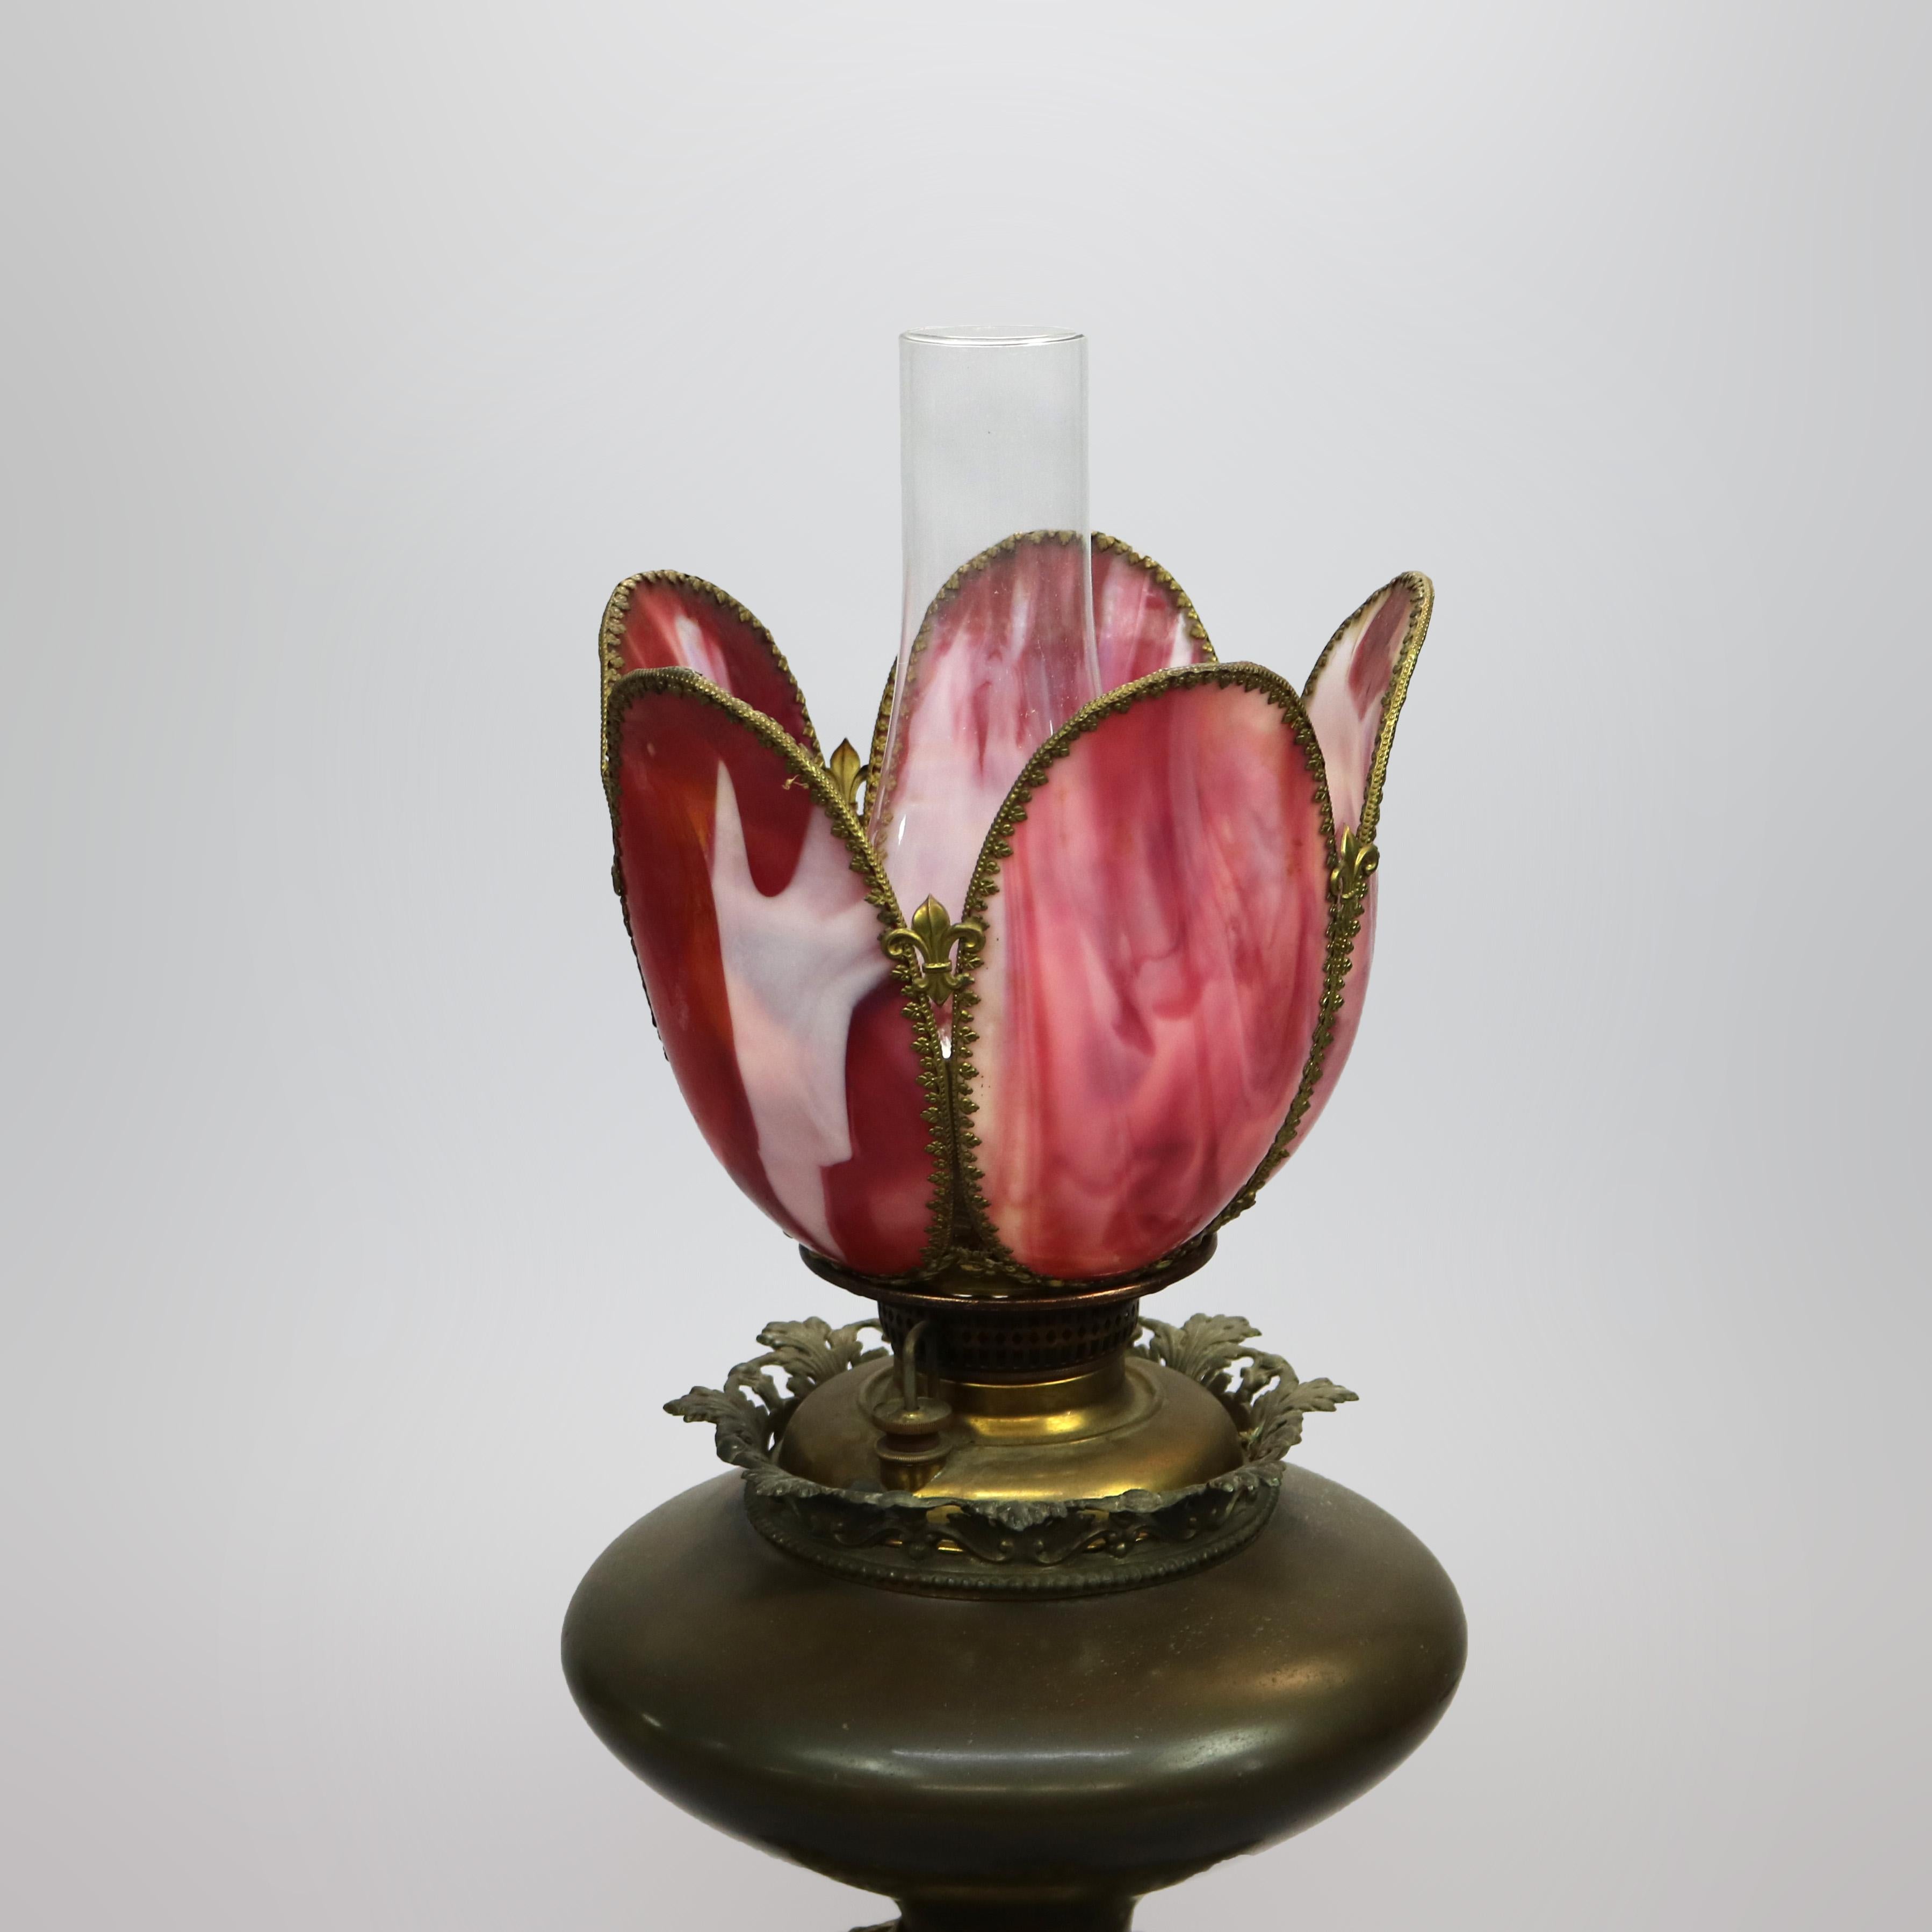 An antique and large Victorian oil lamp by Bradley and Hubbard offers cranberry slag glass tulip form shade over font with footed base, maker signed as photographed, c1890

Measures: 20.25